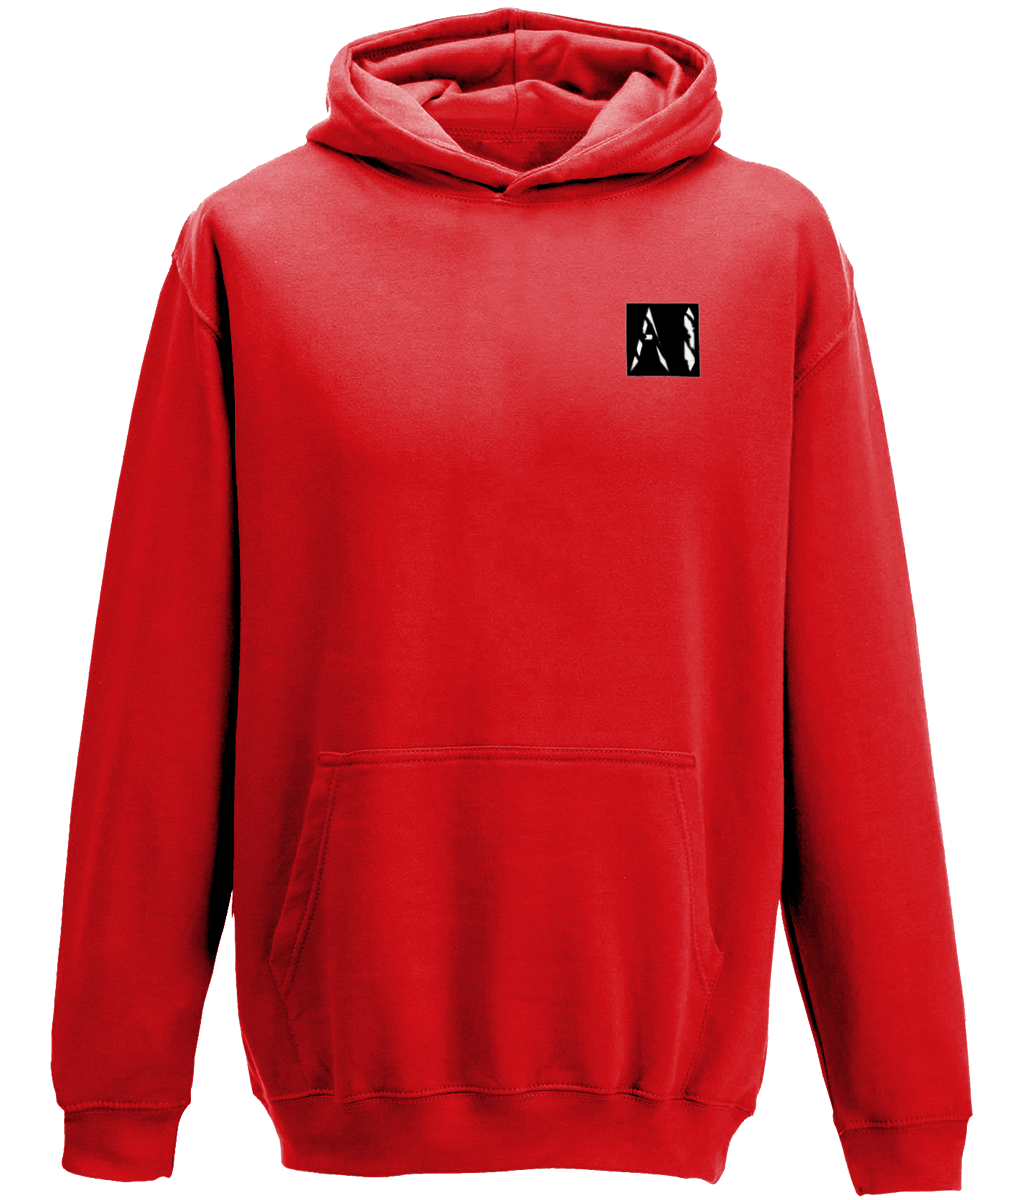 Animal Instinct Signature Box Logo Red Hoodie with white AI logo within a black box located on the left chest